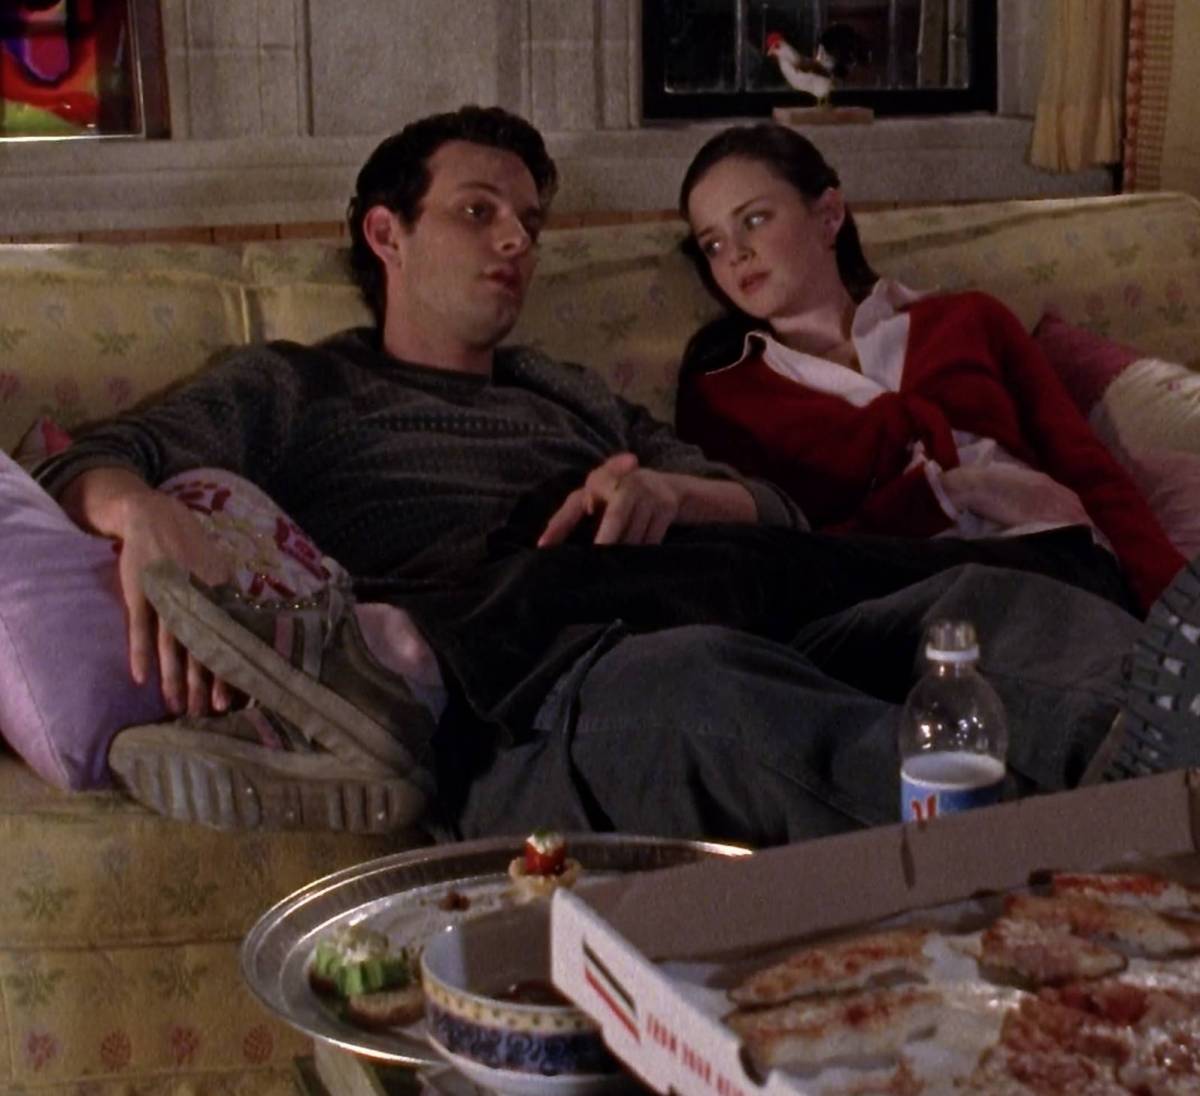 Marty and Rory lie on the couch in front of a pizza box